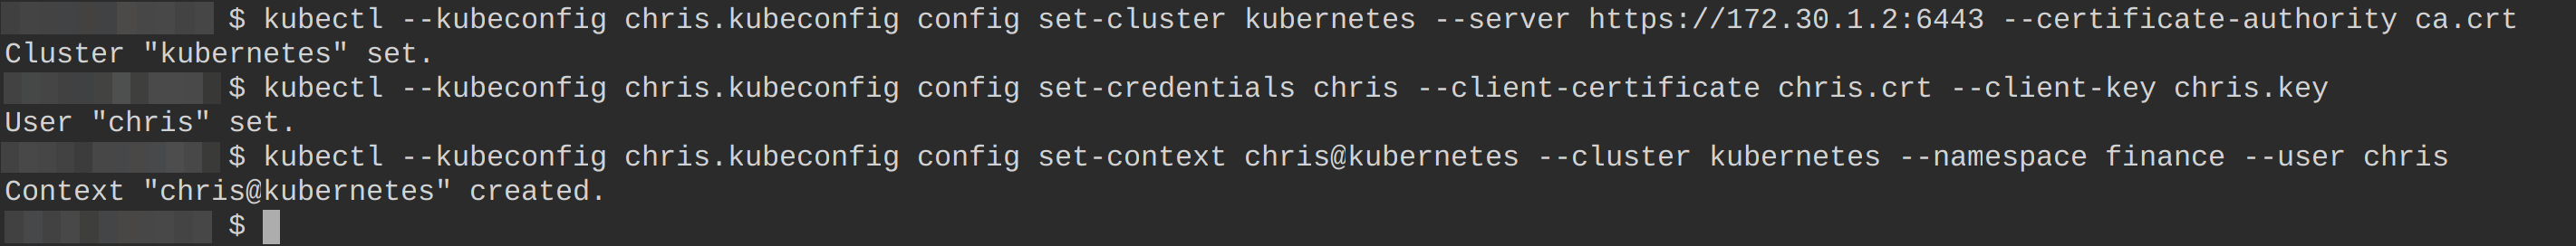 Creating a kubeconfig file for the new user (chris)